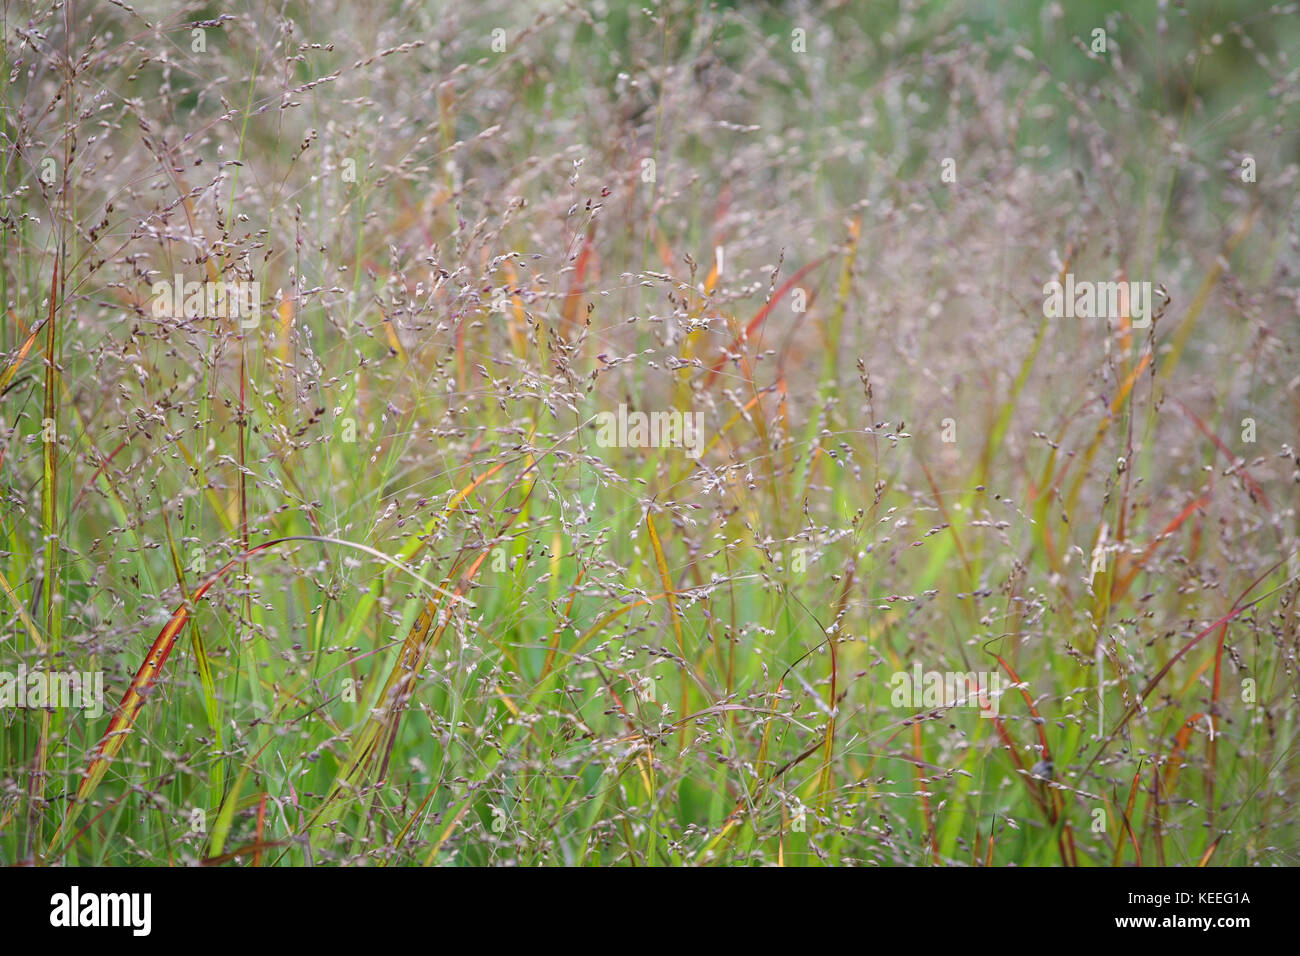 Panicum virgatum 'Shenandoah' / switch grass in autumn, with finely branching small delicate flowers Stock Photo